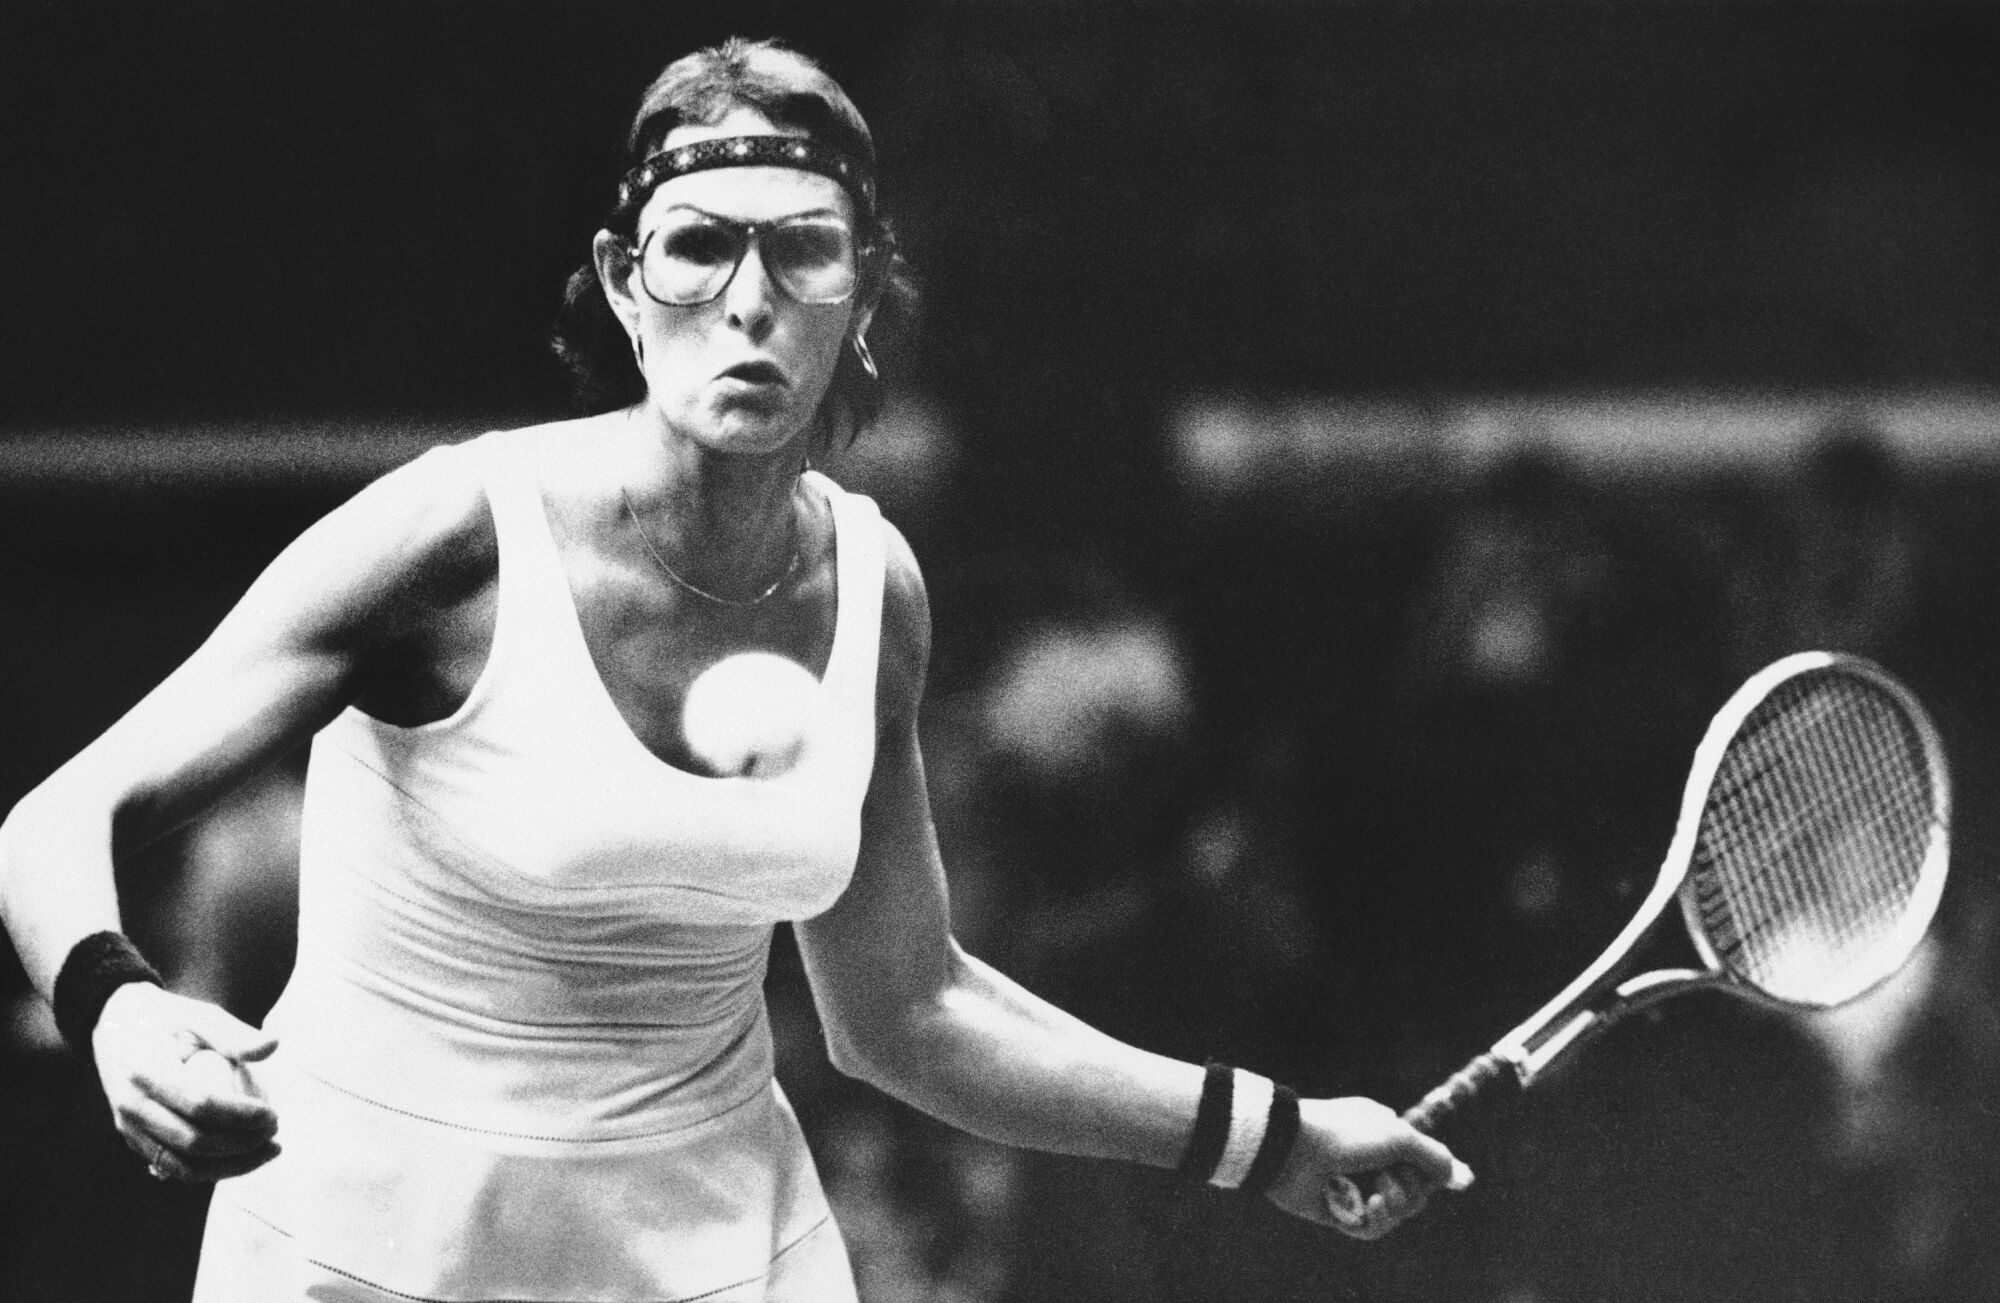 Renee Richards competes during a women's tennis tournament in Newport Beach in February 1978.